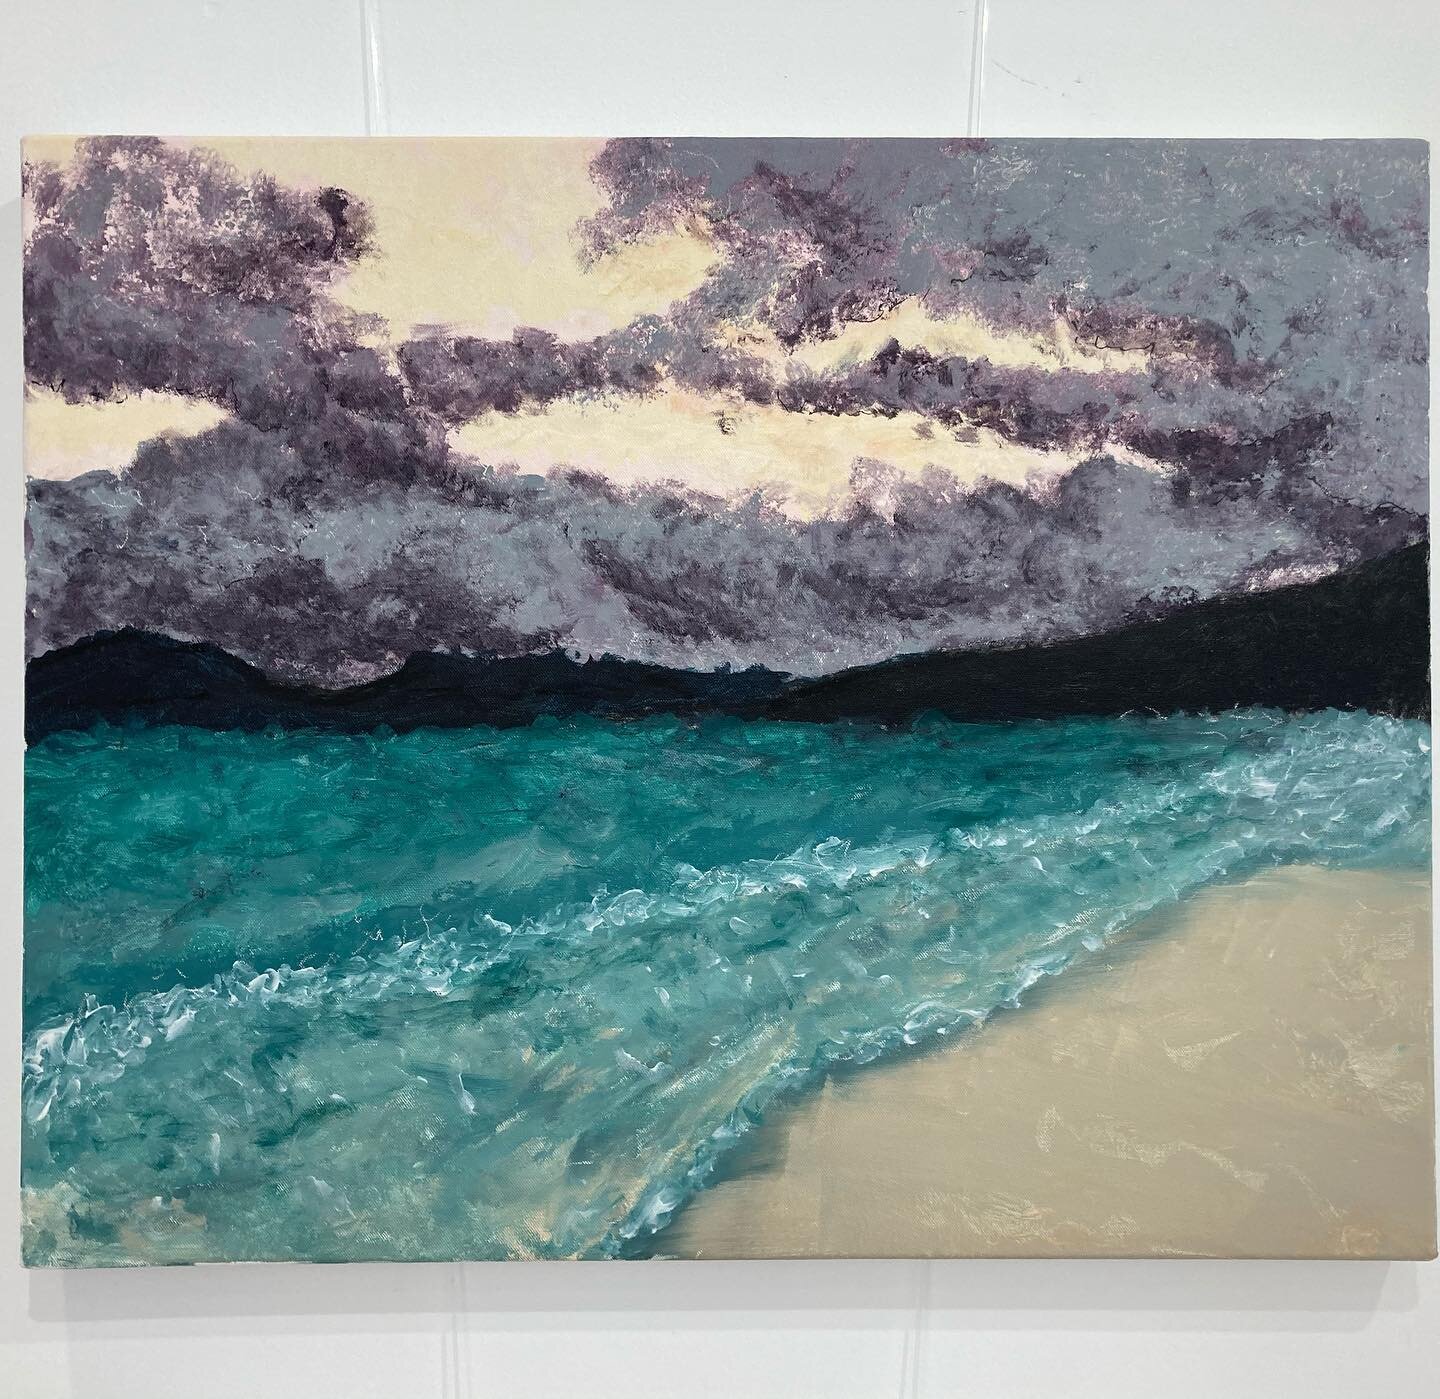 Exploring the colour and light of the Hebrides, this exhibition of work by Susie Lamb Art is showing and available at Talla na Mara, West Harris until 31st July.

If you are visiting or based in the Isle of Harris do go and check it out..

Pieces can